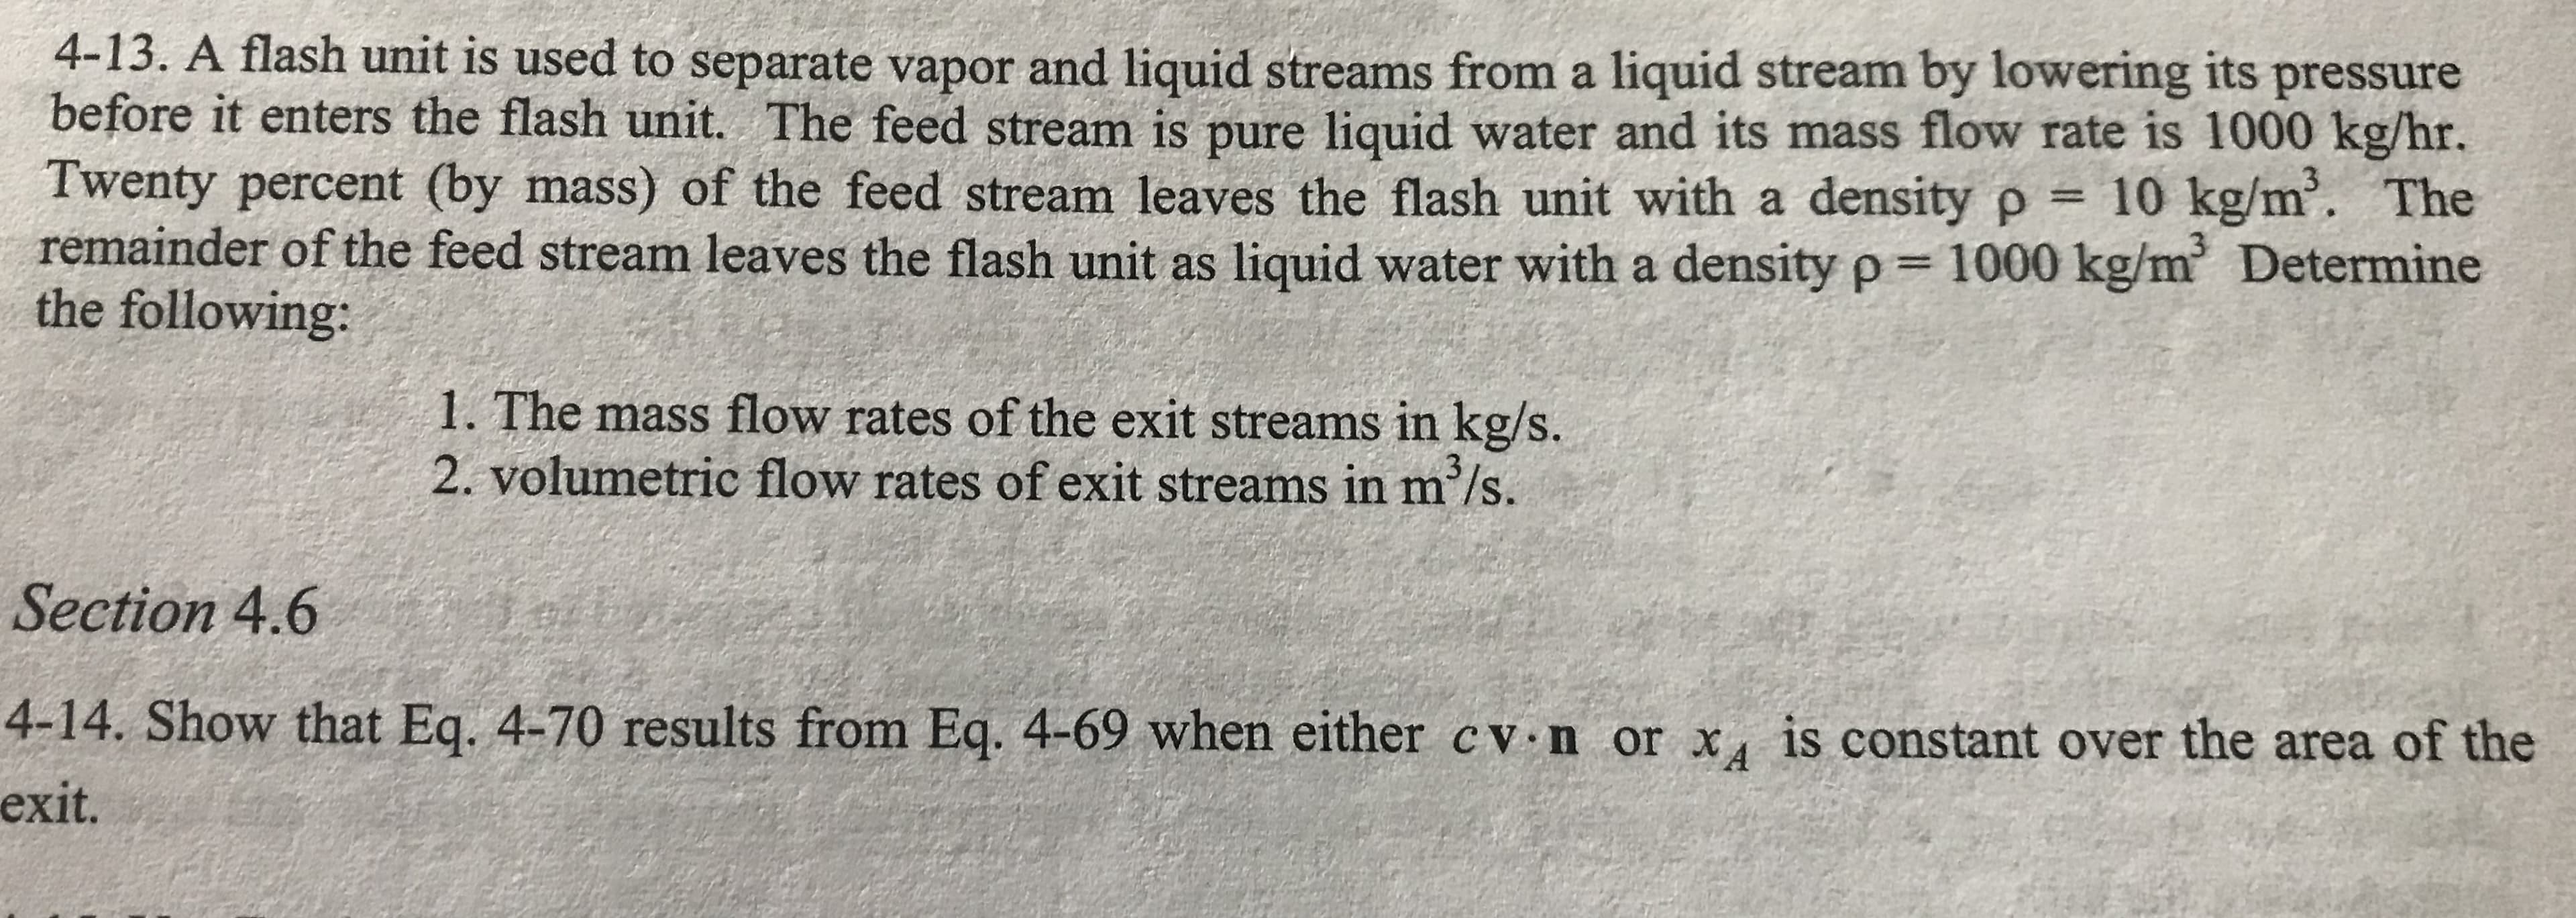 4-13. A flash unit is used to separate vapor and liquid streams from a liquid stream by lowering its pressure
before it enters the flash unit. The feed stream is pure liquid water and its mass flow rate is 1000 kg/hr.
Twenty percent (by mass) of the feed stream leaves the flash unit with a density p 10 kg/m. The
remainder of the feed stream leaves the flash unit as liquid water with a density p 1000 kg/m Determine
the following:
3
1. The mass flow rates of the exit streams in kg/s.
2. volumetric flow rates of exit streams in m /s.
Section 4.6
4-14. Show that Eq. 4-70 results from Eq. 4-69 when either c v n or x is constant over the area of the
exit.
